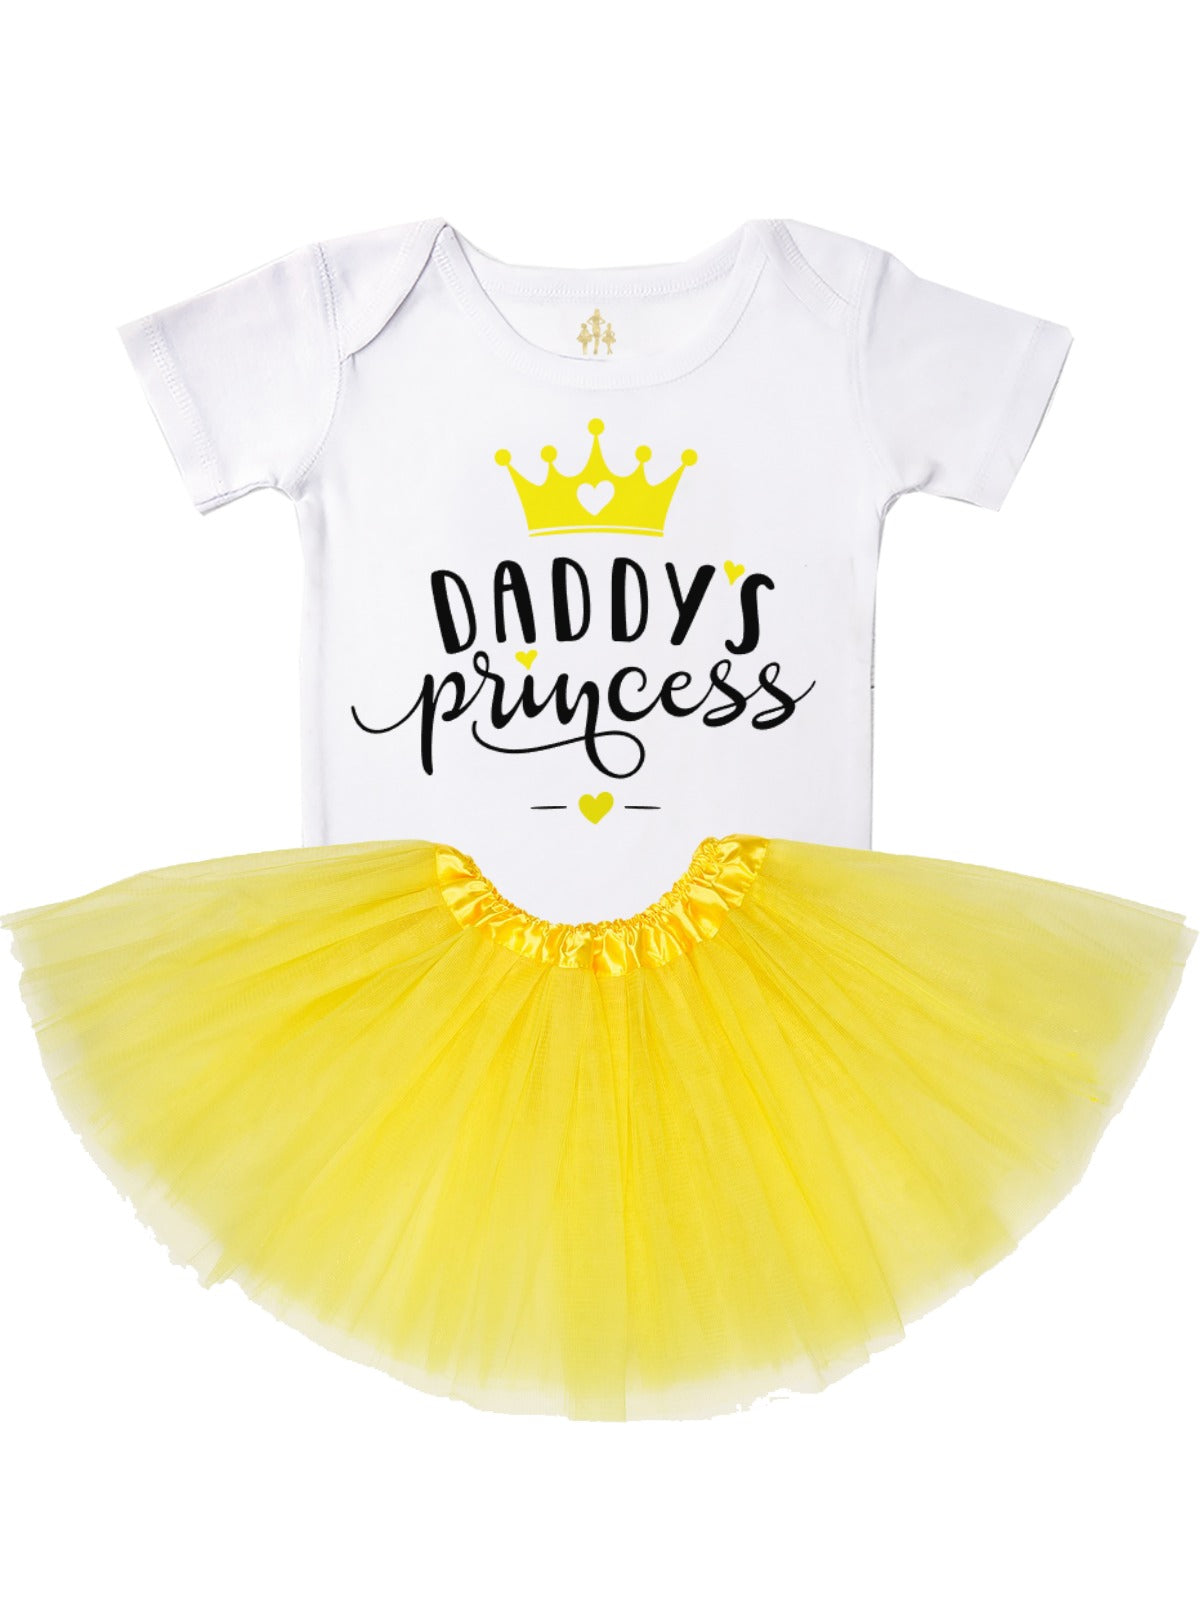 Daddy's princess black and yellow tutu outfit